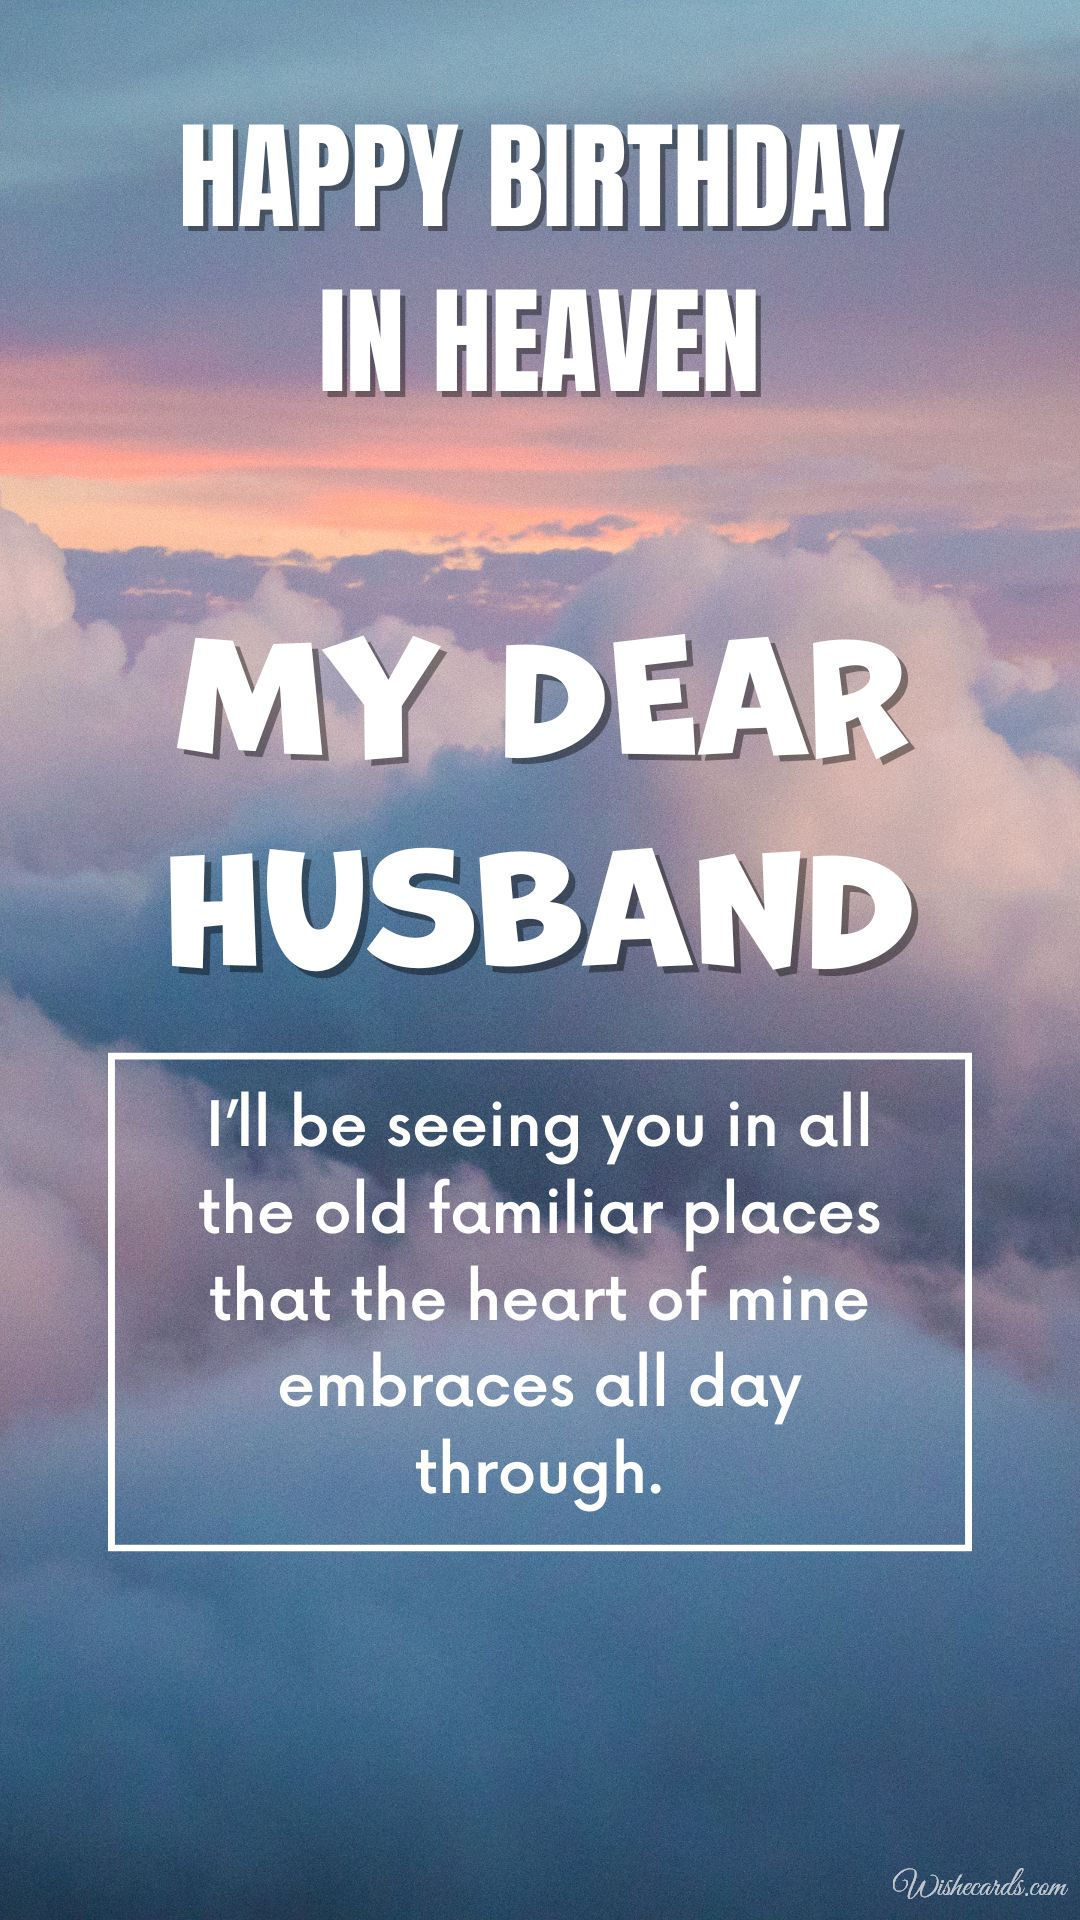 Birthday Card for Husband in Heaven